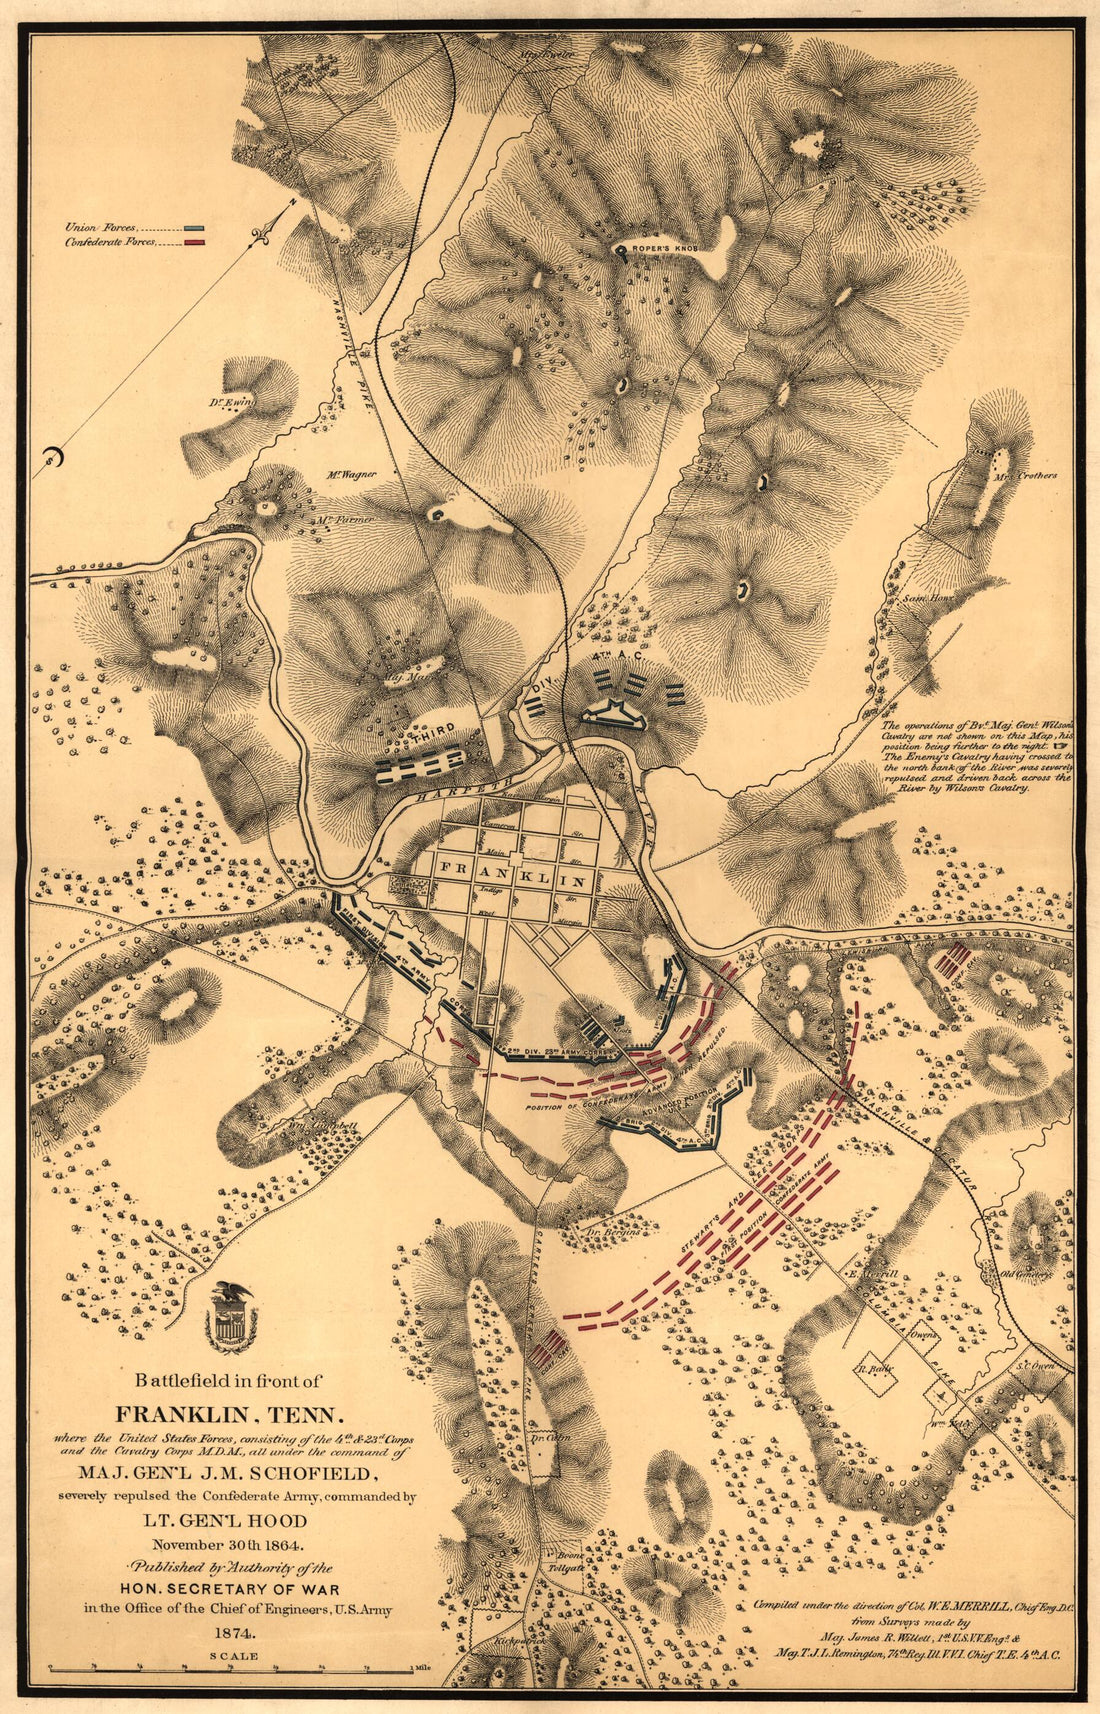 This old map of Battlefield In Front of Franklin, Tennessee Where the United States Forces, Consisting of the 4th &amp; 23rd Corps and the Cavalry Corps M.D.M., All Under the Command of Maj. Gen&